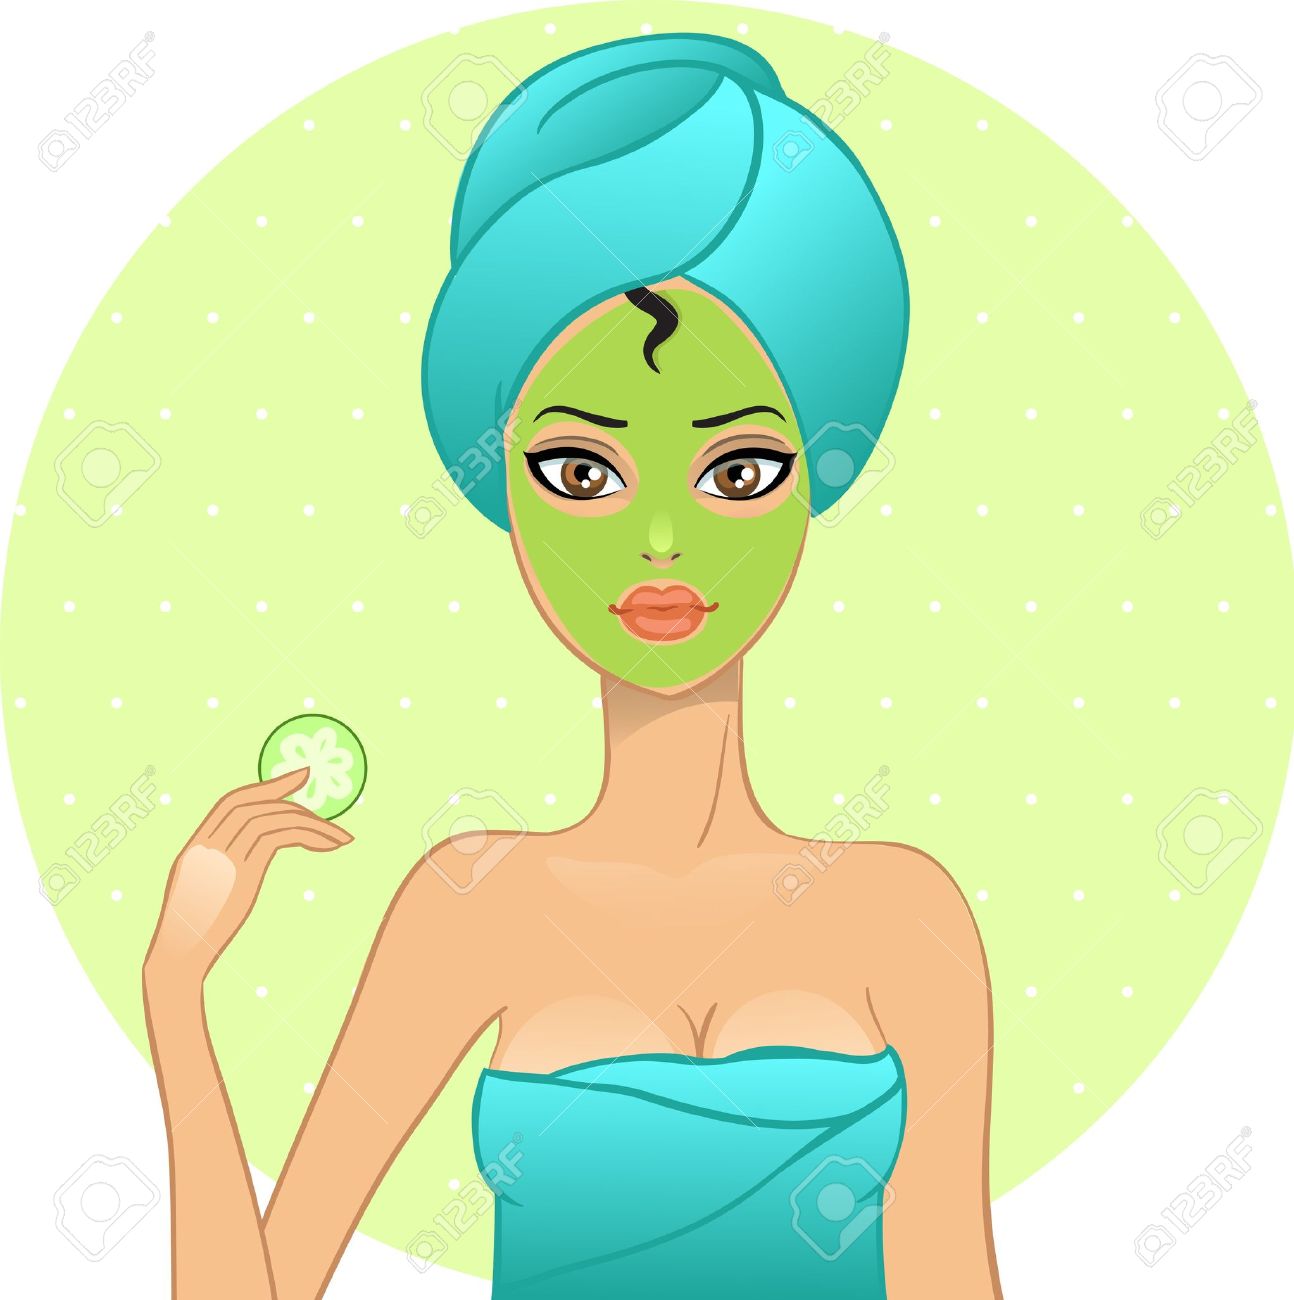 Young Girl Having A Beauty Treatment. Vector Illustration Royalty.